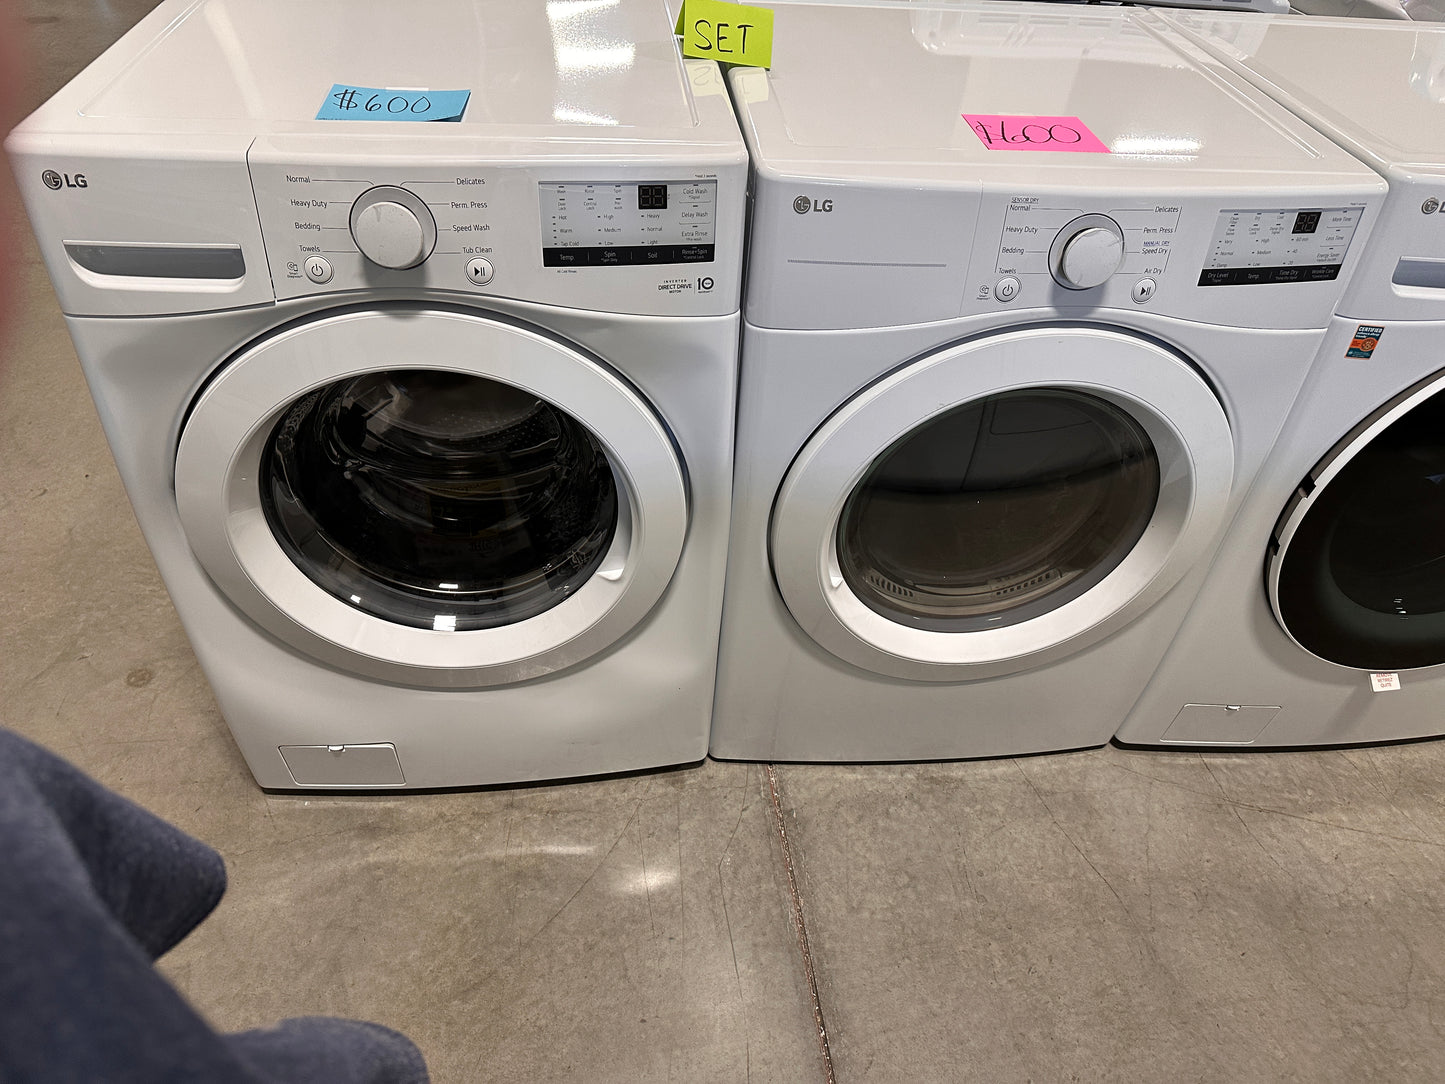 NEW LG STACKABLE LAUNDRY SET - WAS12856 DRY12245